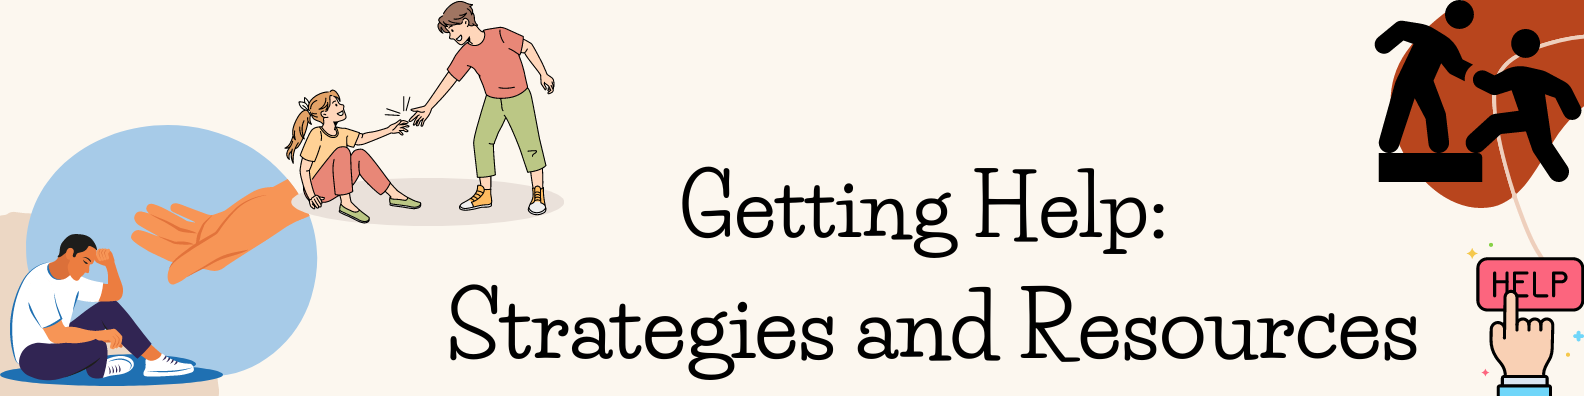 Getting Help: Strategies and Resource for your mental health challenges for college students